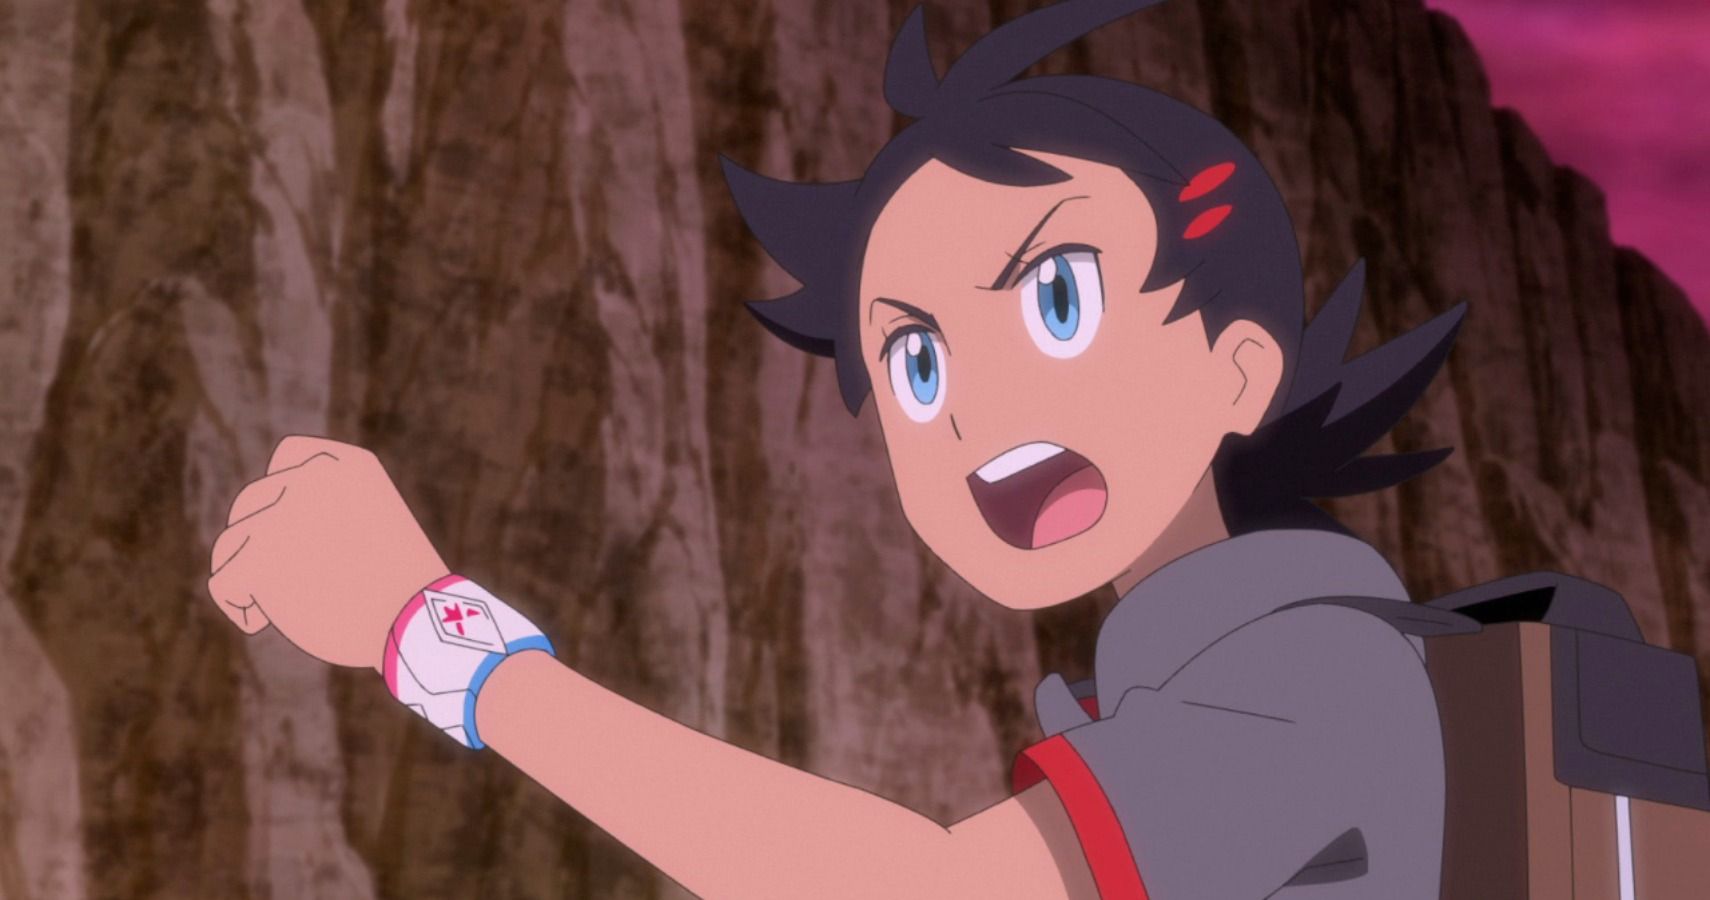 What Makes Pokemon's Newest Protagonist So Controversial Among Fans